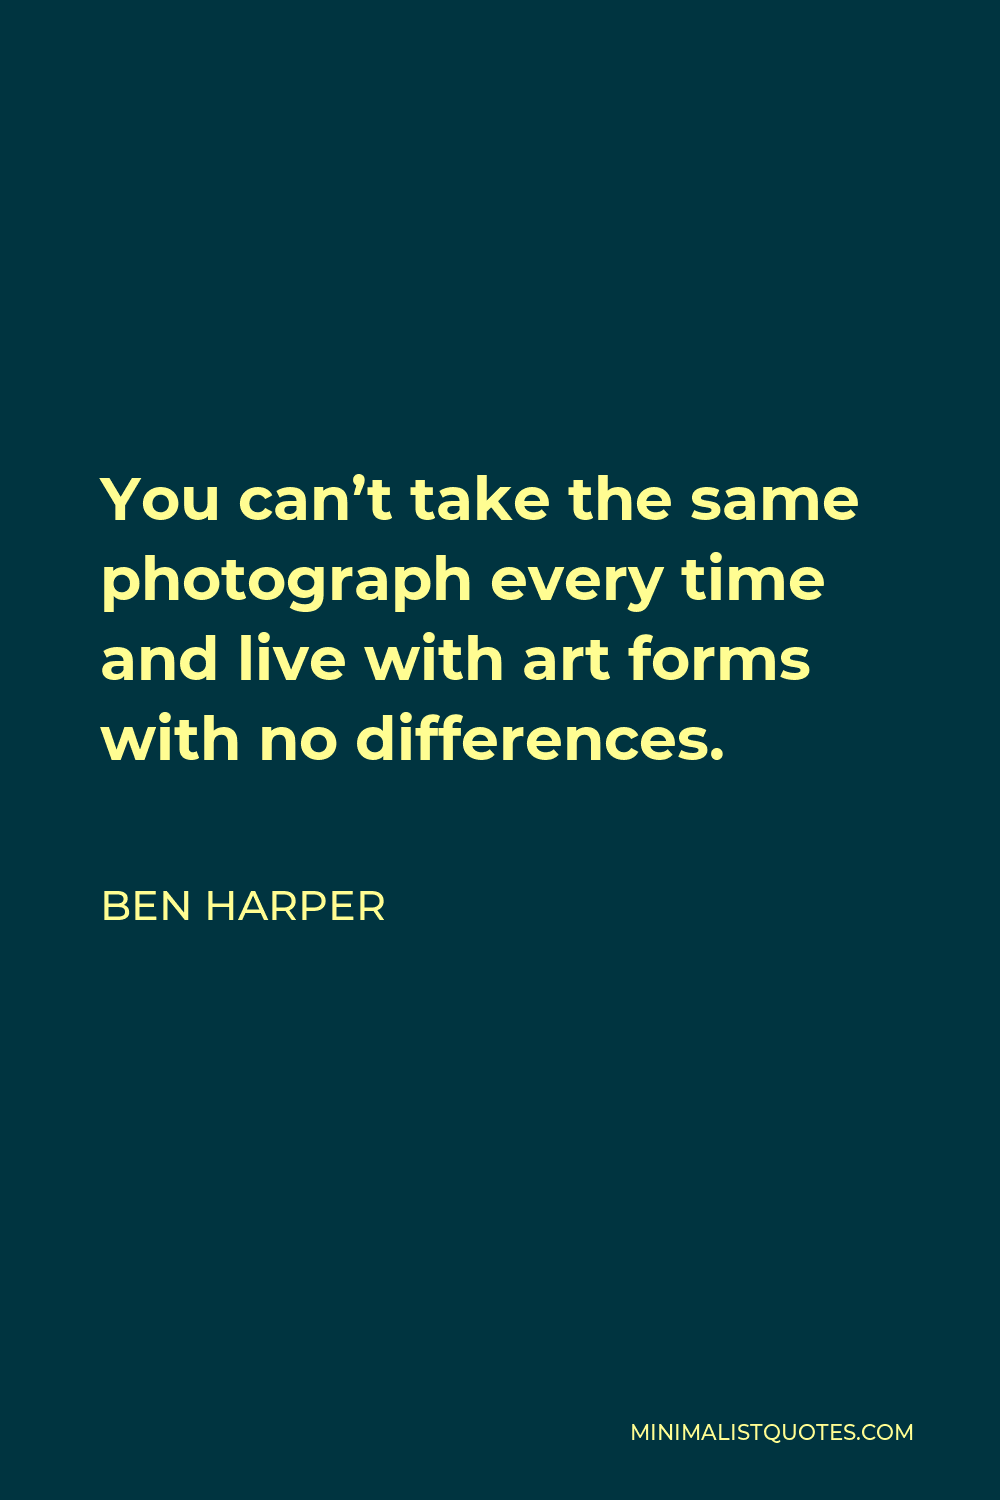 Ben Harper Quote - You can’t take the same photograph every time and live with art forms with no differences.